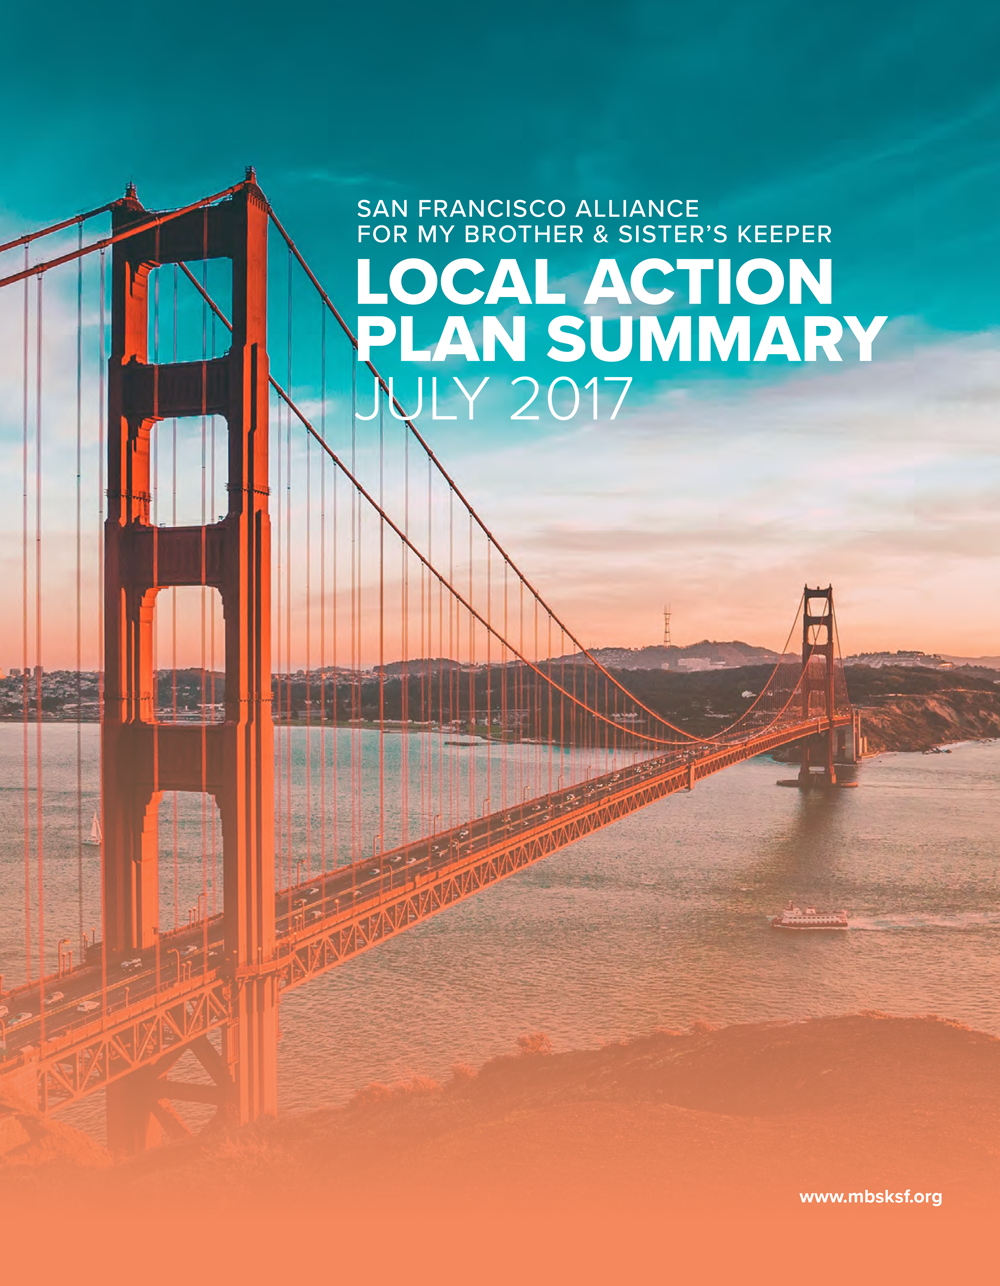 SF Alliance for My Brother & Sister's Keeper - 2017 Local Action Plan Summary